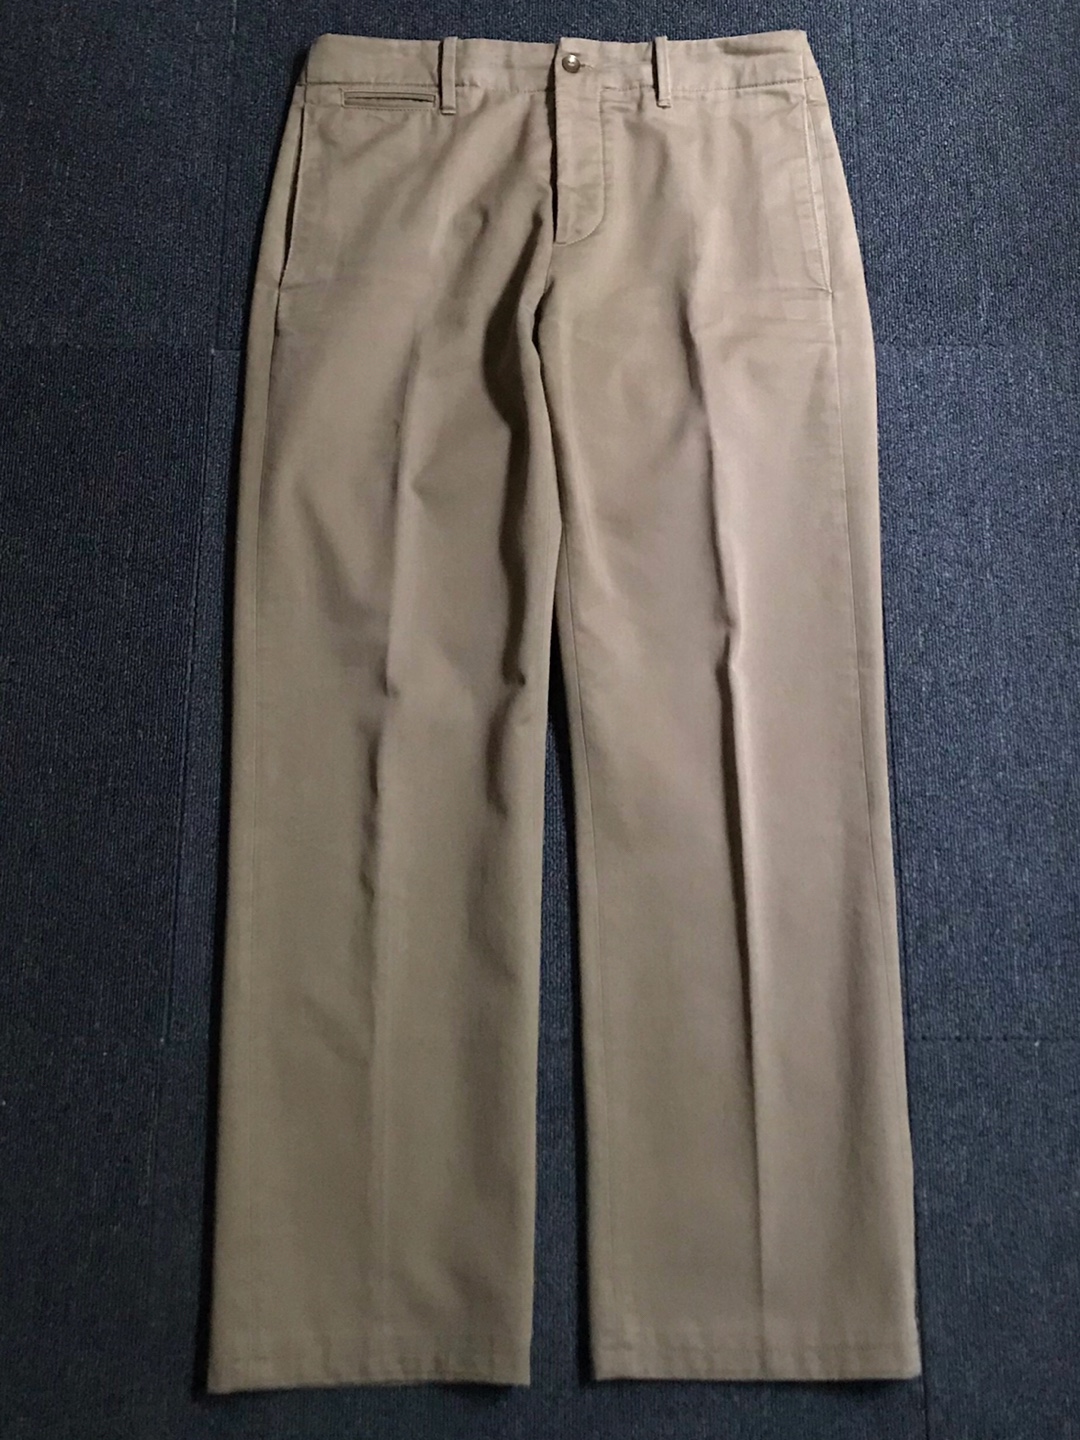 ychai cotton twill pants Italy made (30 size, ~31인치 추천)